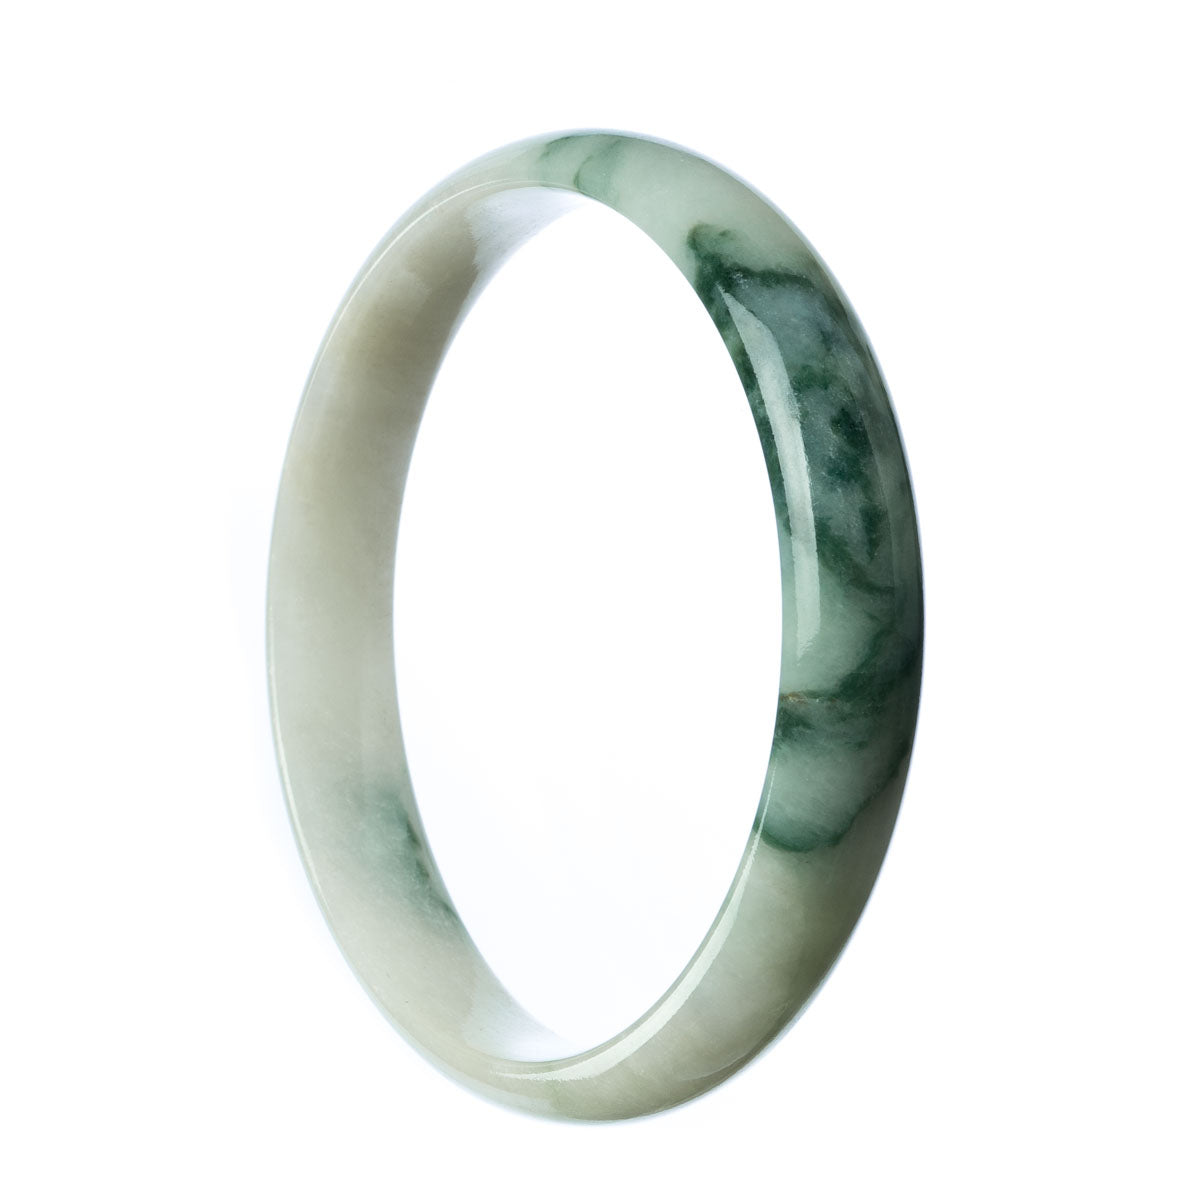 A close-up image of an authentic Type A Green Traditional Jade Bangle Bracelet. The bracelet is in a half-moon shape and measures 74mm in size. The jade has a rich green color, and the bracelet is beautifully crafted. It is a MAYS™ product, known for its high quality and authenticity.